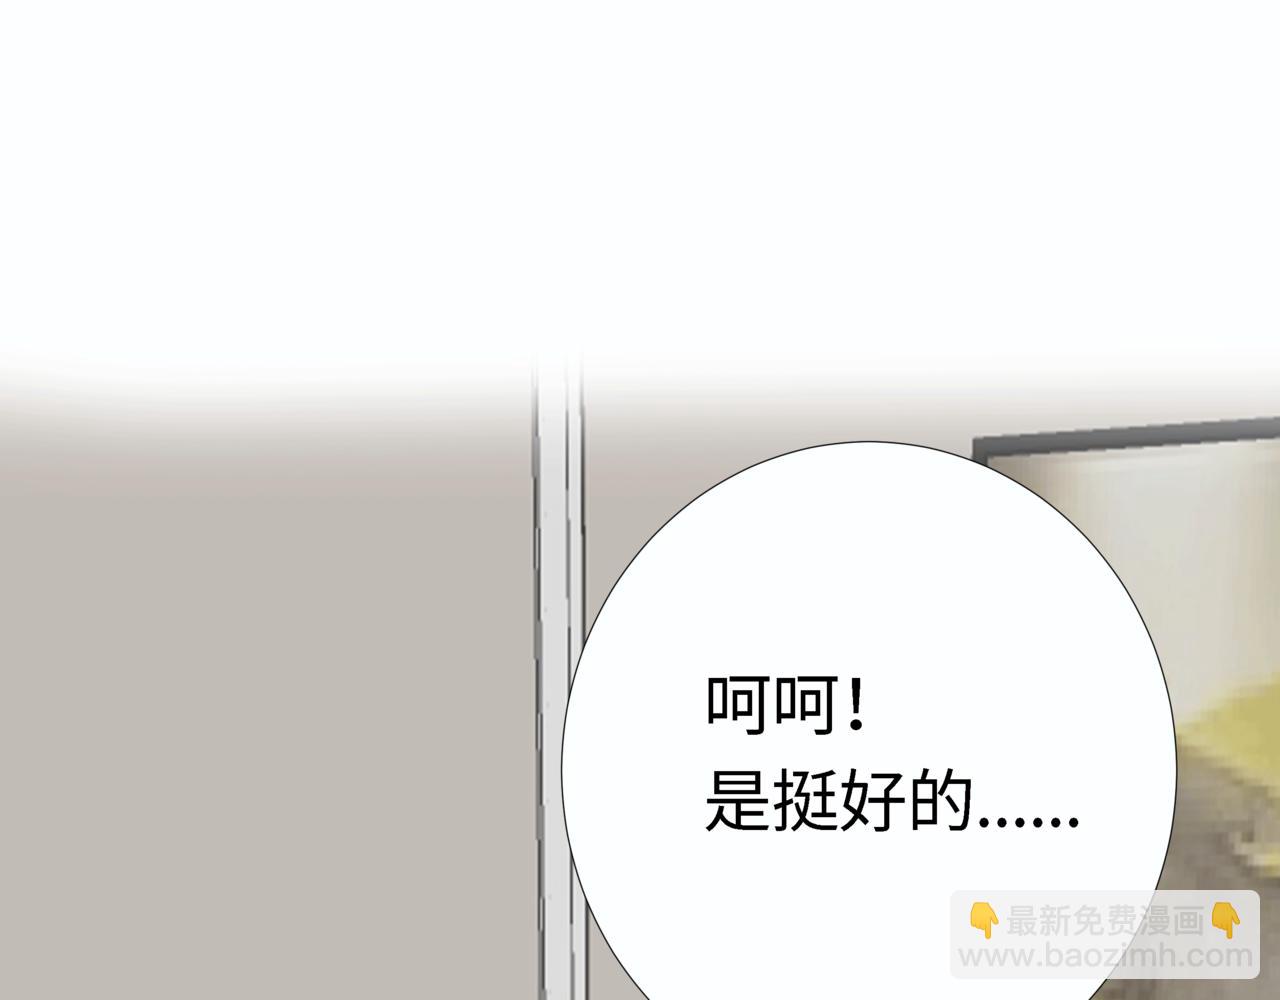 Only You - 第16話：強吻（下）(1/2) - 2